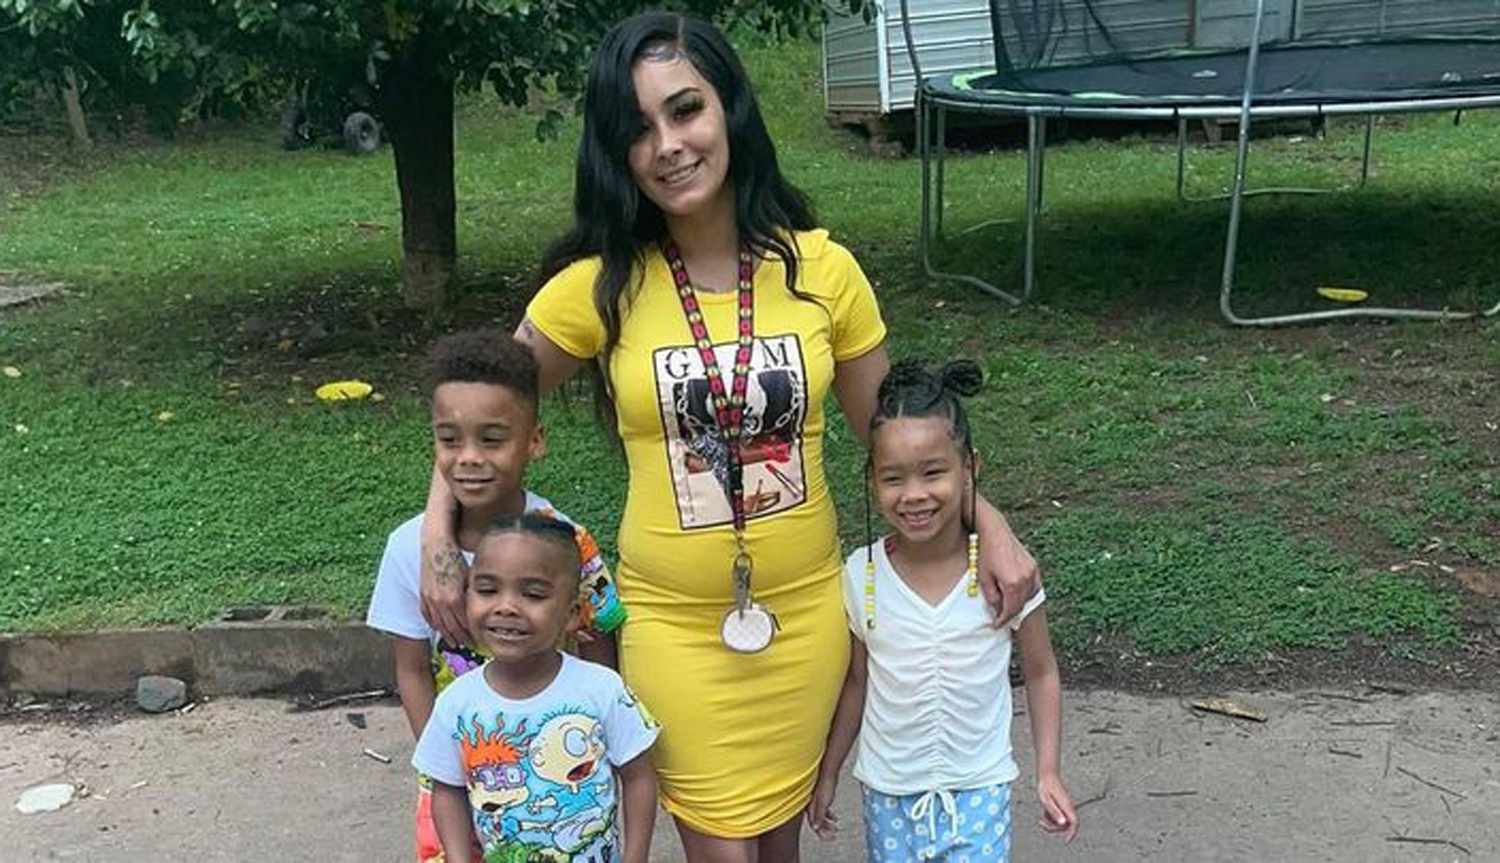 Police said the body of Breanna Burgess, a mother of three who was 20 weeks pregnant, was discovered early Wednesday as officers patrolled near Fort Drive in LaGrange, Georgia